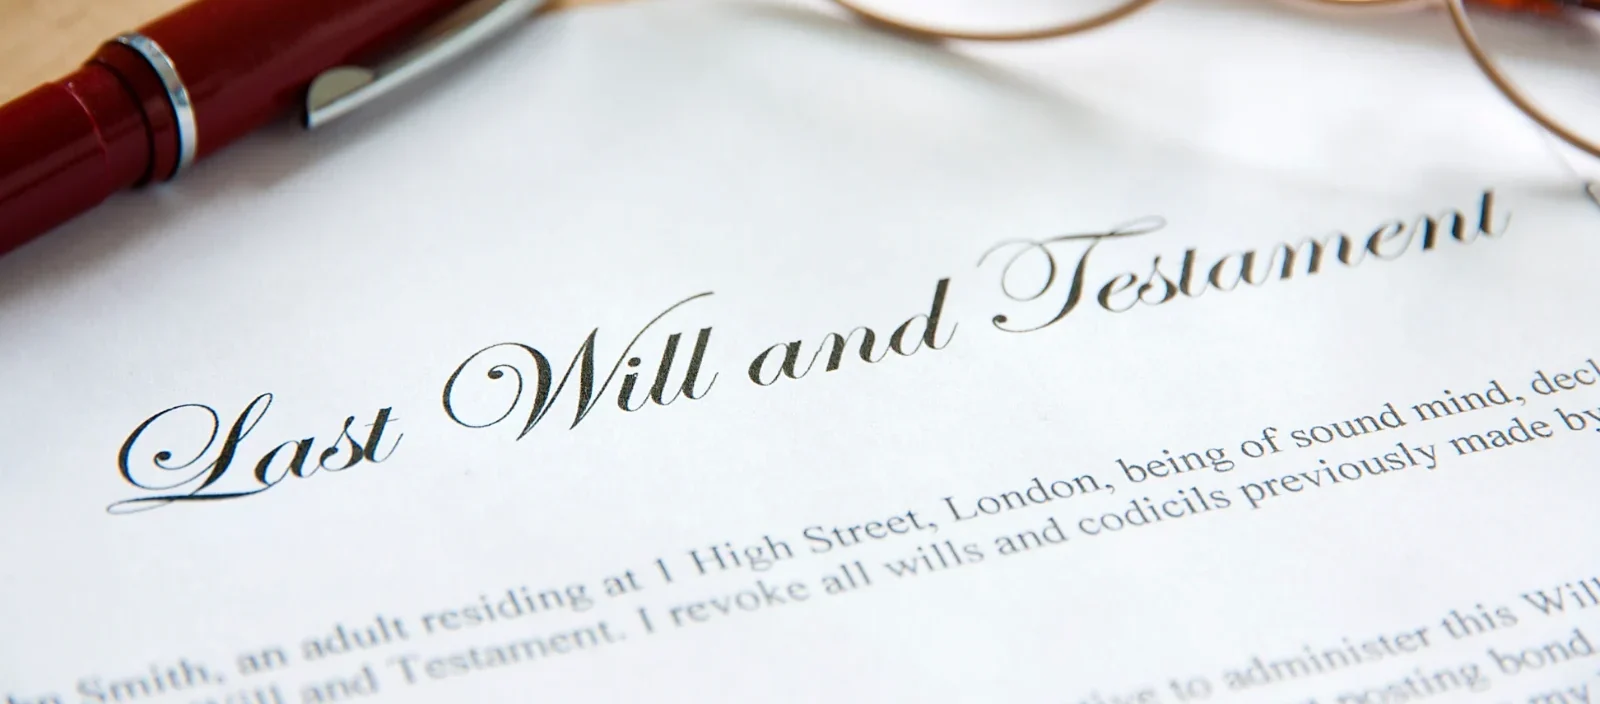 Grant of Letters of Administration services, Grant of Probate services, wills services.